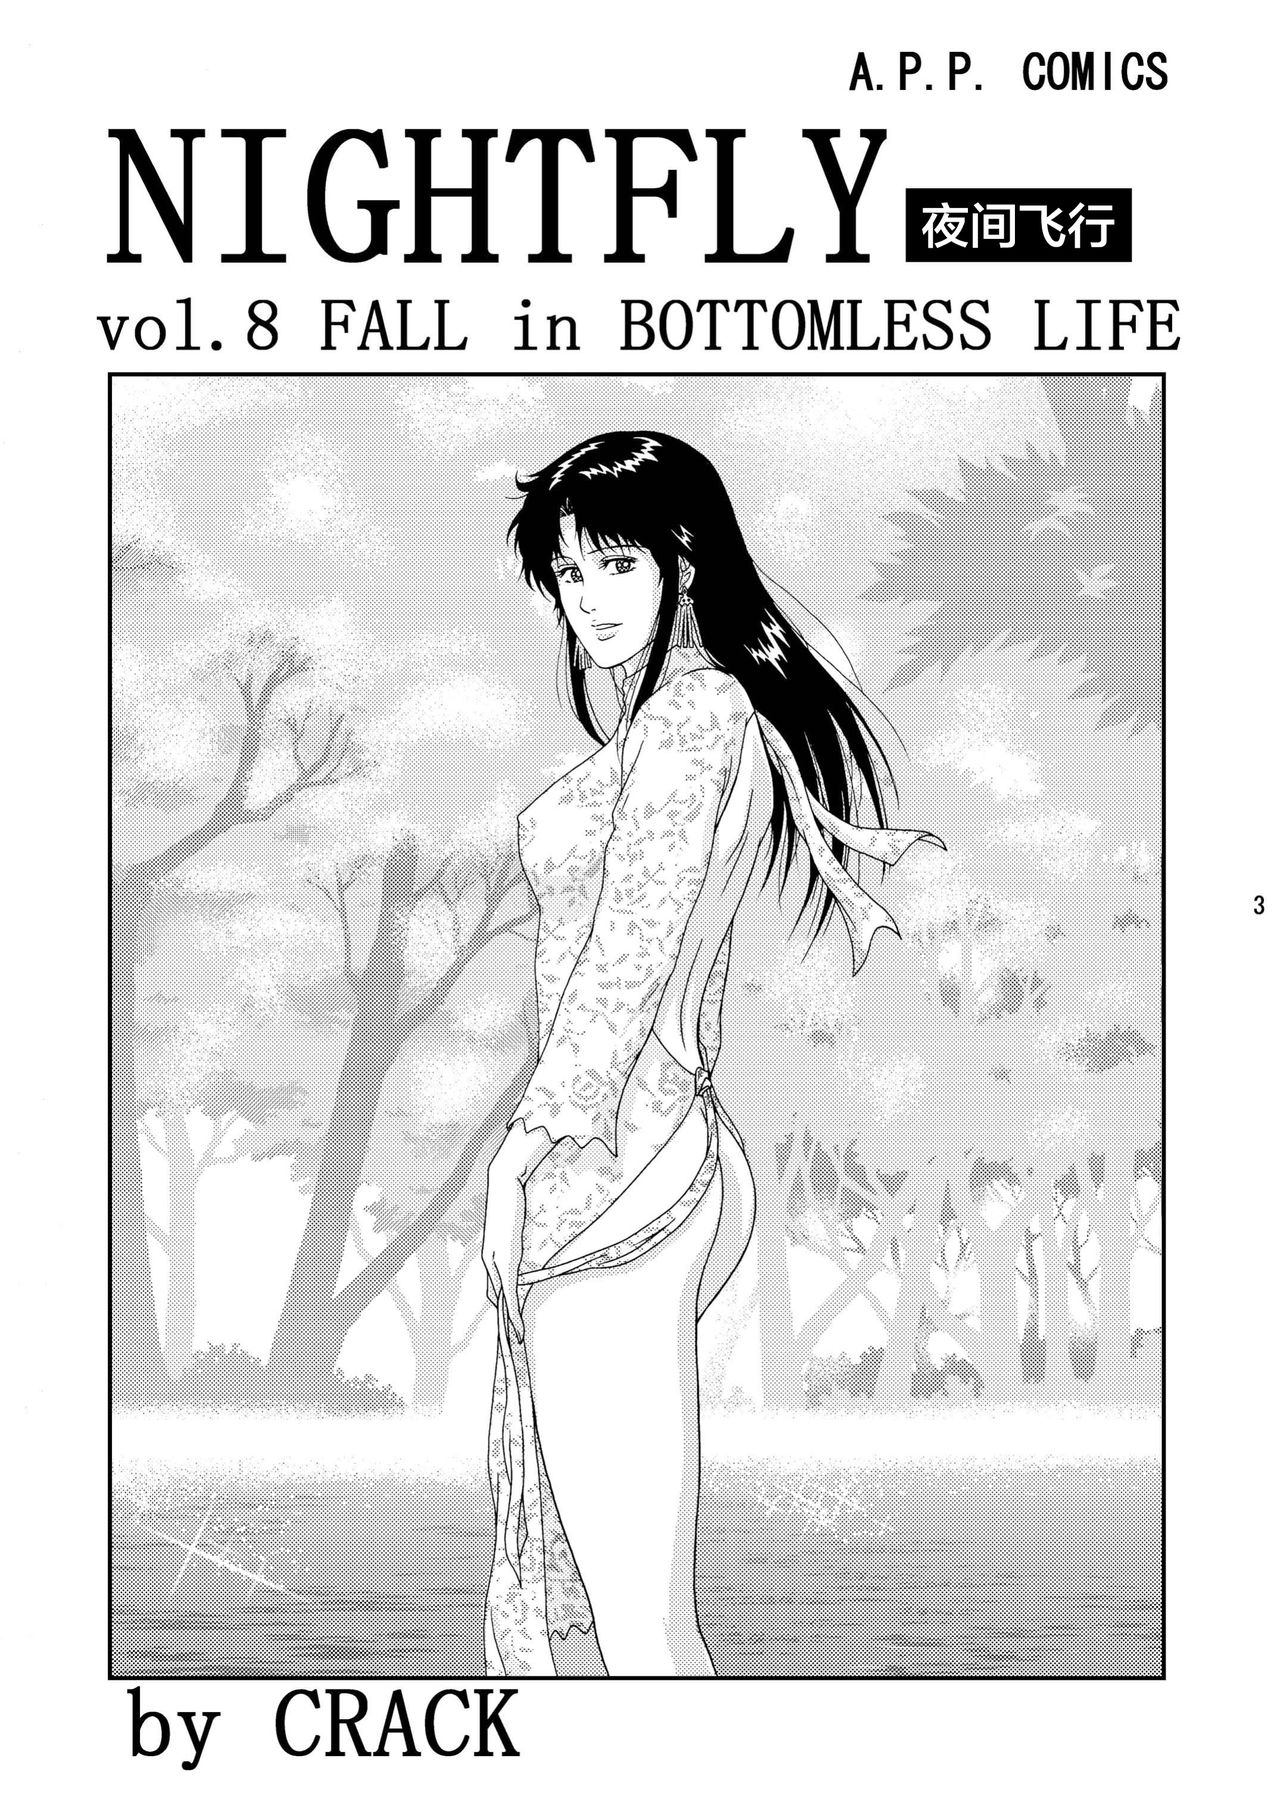 (C75) [Atelier Pinpoint (CRACK)] NIGHTFLY vol.8 FALL in BOTTOMLESS LIFE (Cat's Eye) [Chinese] [不咕鸟汉化组] (C75) [アトリエピンポイント (クラック)] 夜間飛行 vol.8 FALL in BOTTOMLESS LIFE (キャッツ・アイ) [中国翻訳]